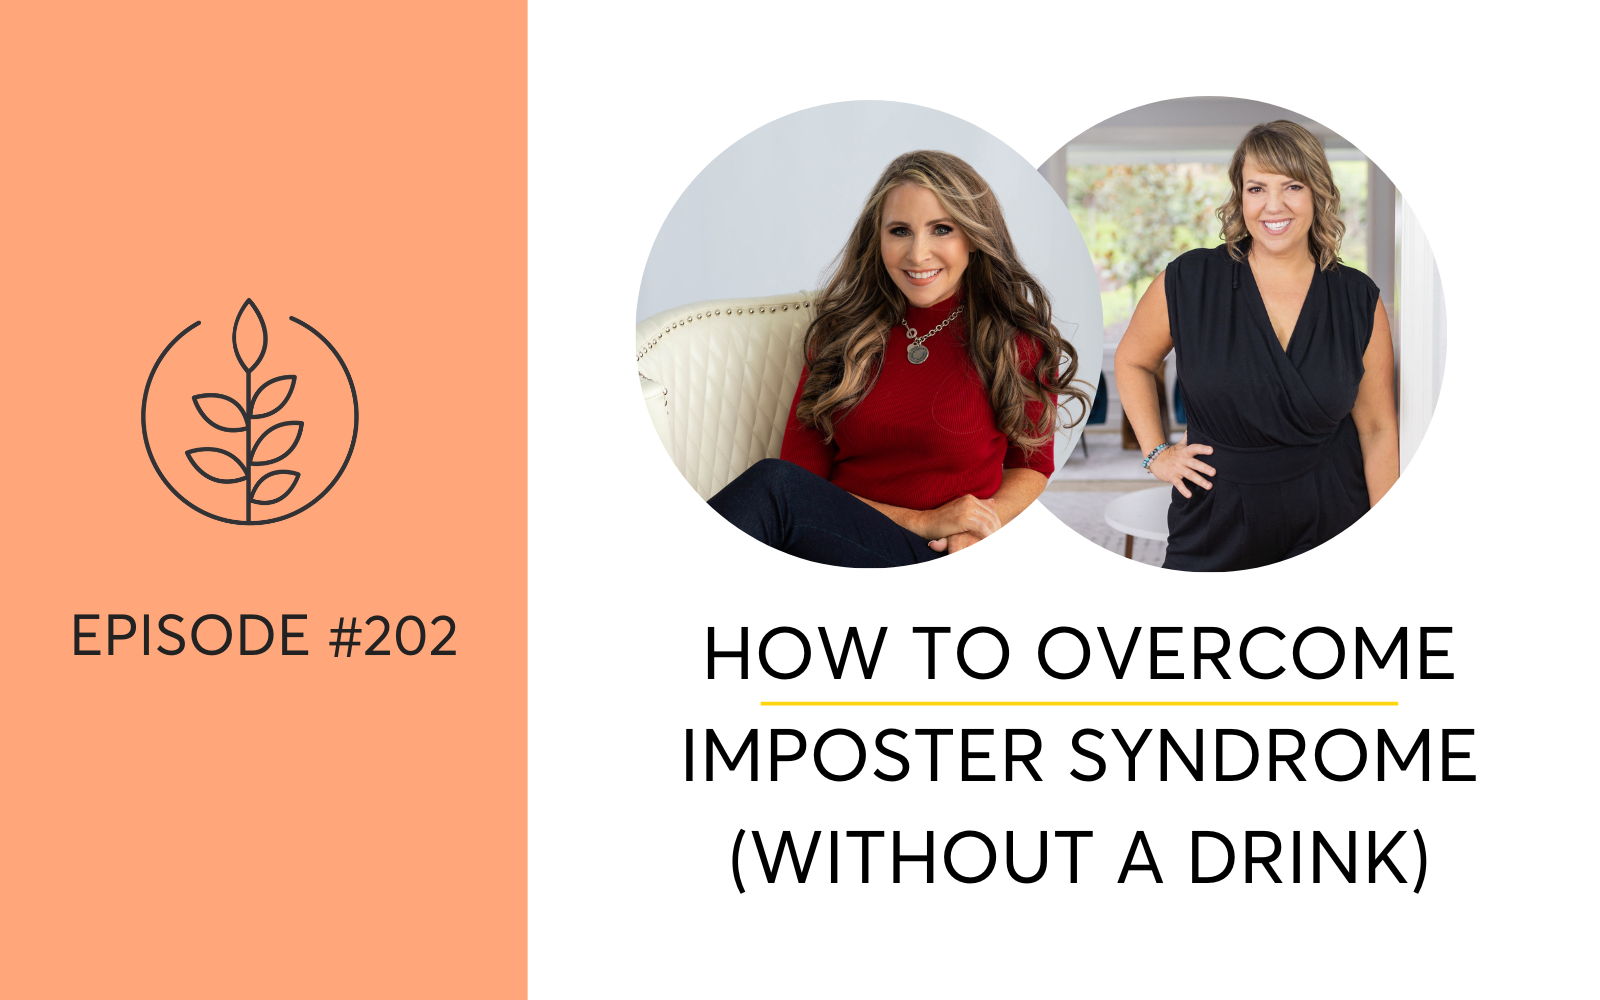 How To Overcome Imposter Syndrome Without A Drink